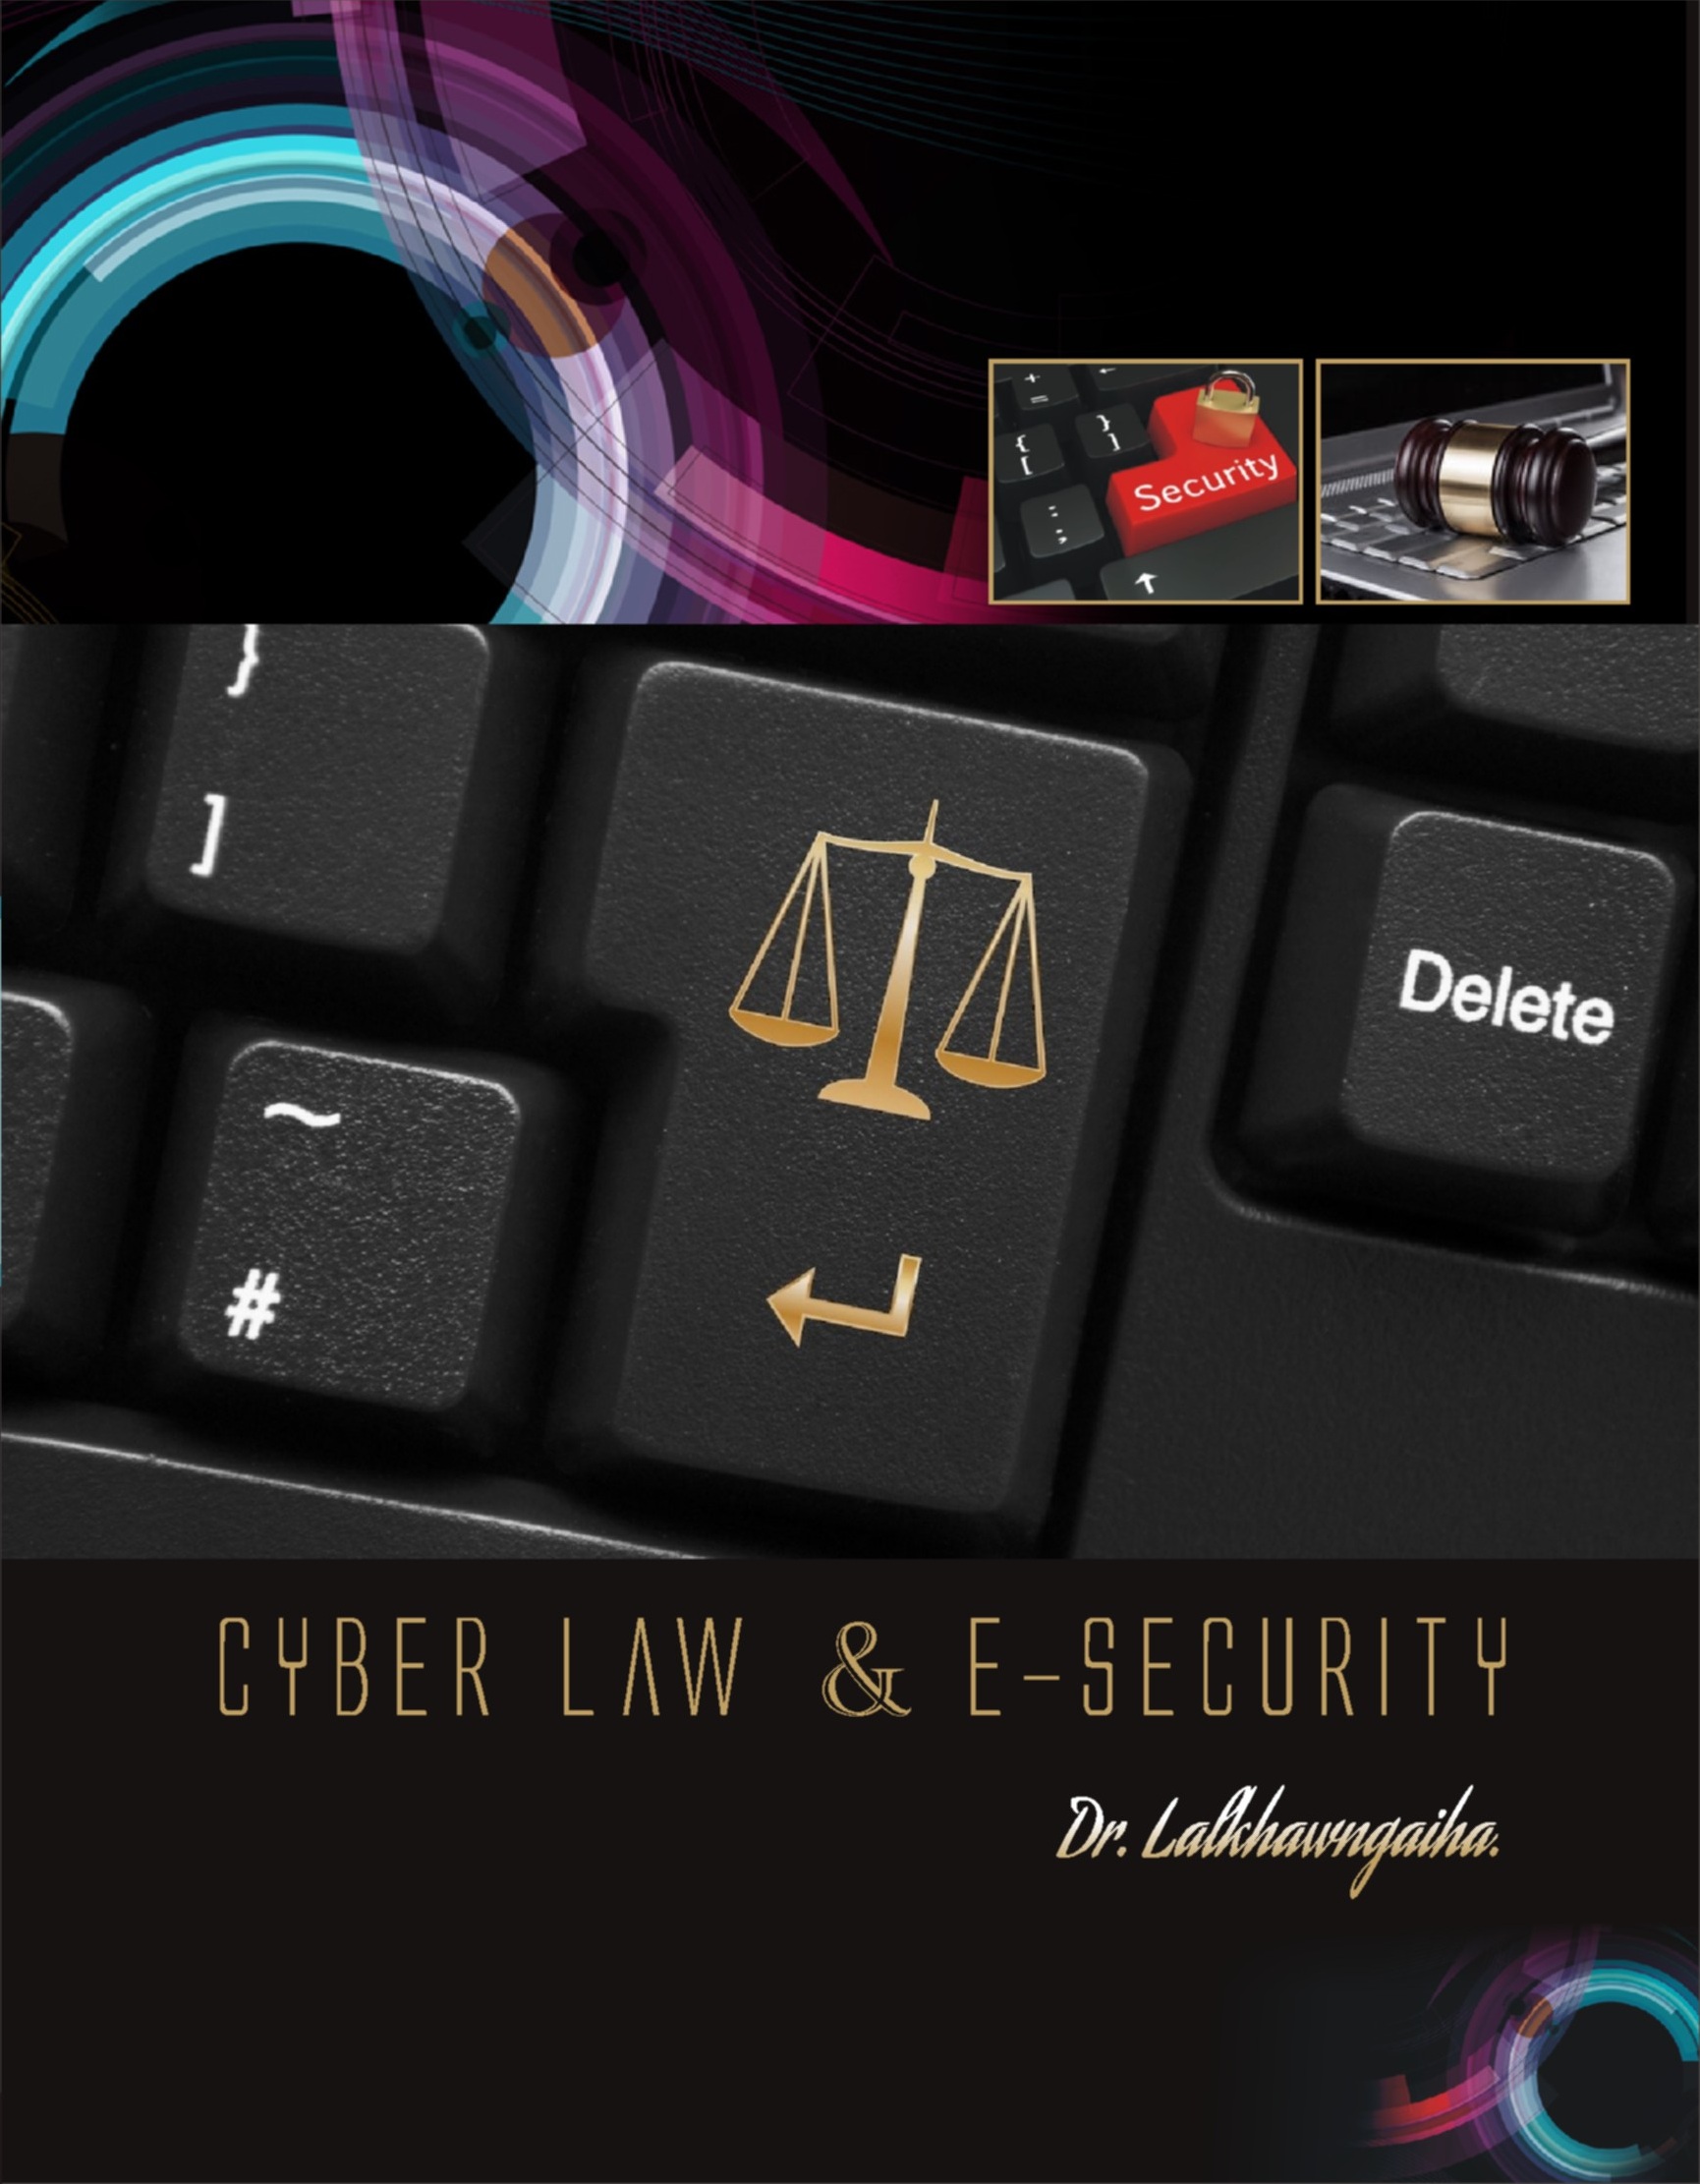 Computer Utilities Produced For Cyber Law India